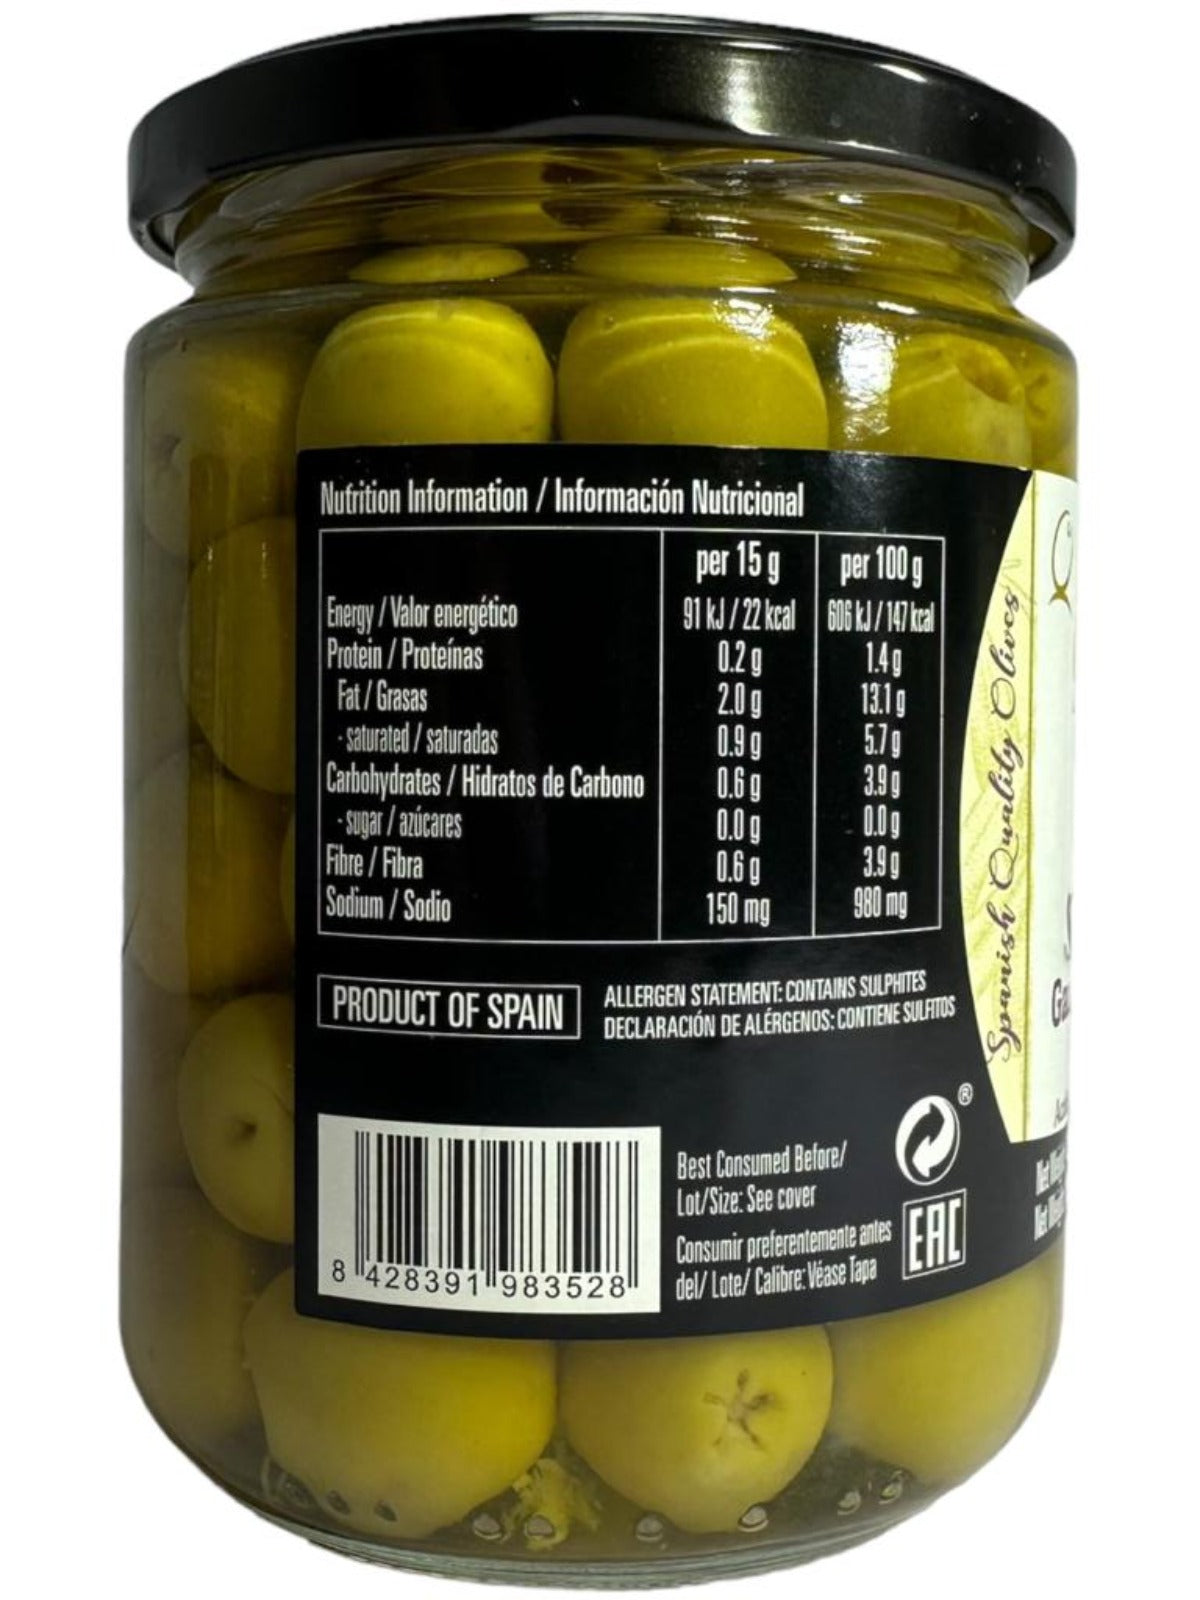 Bernal Gourmet Garlic Stuffed Olives 436g Gross 225g Drained Best Before End of May 2027